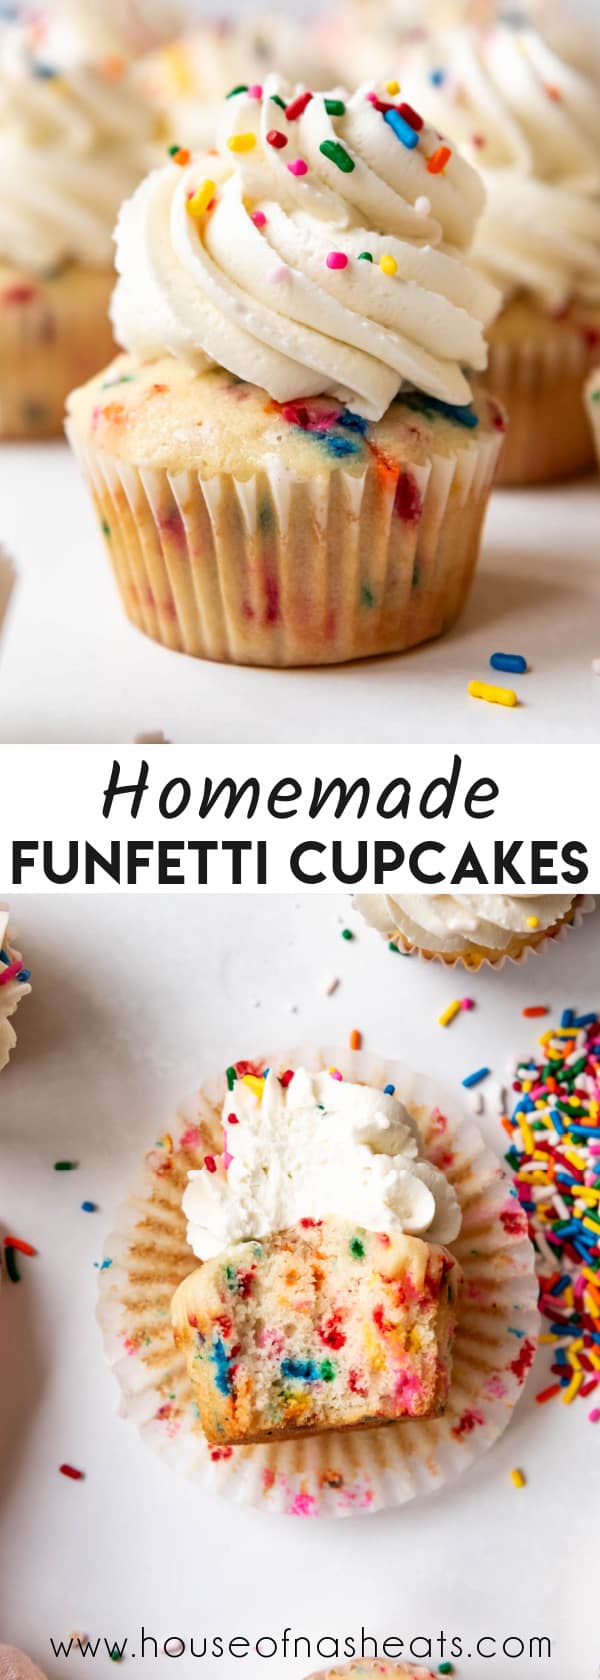 A collage of images of funfetti cupcakes.